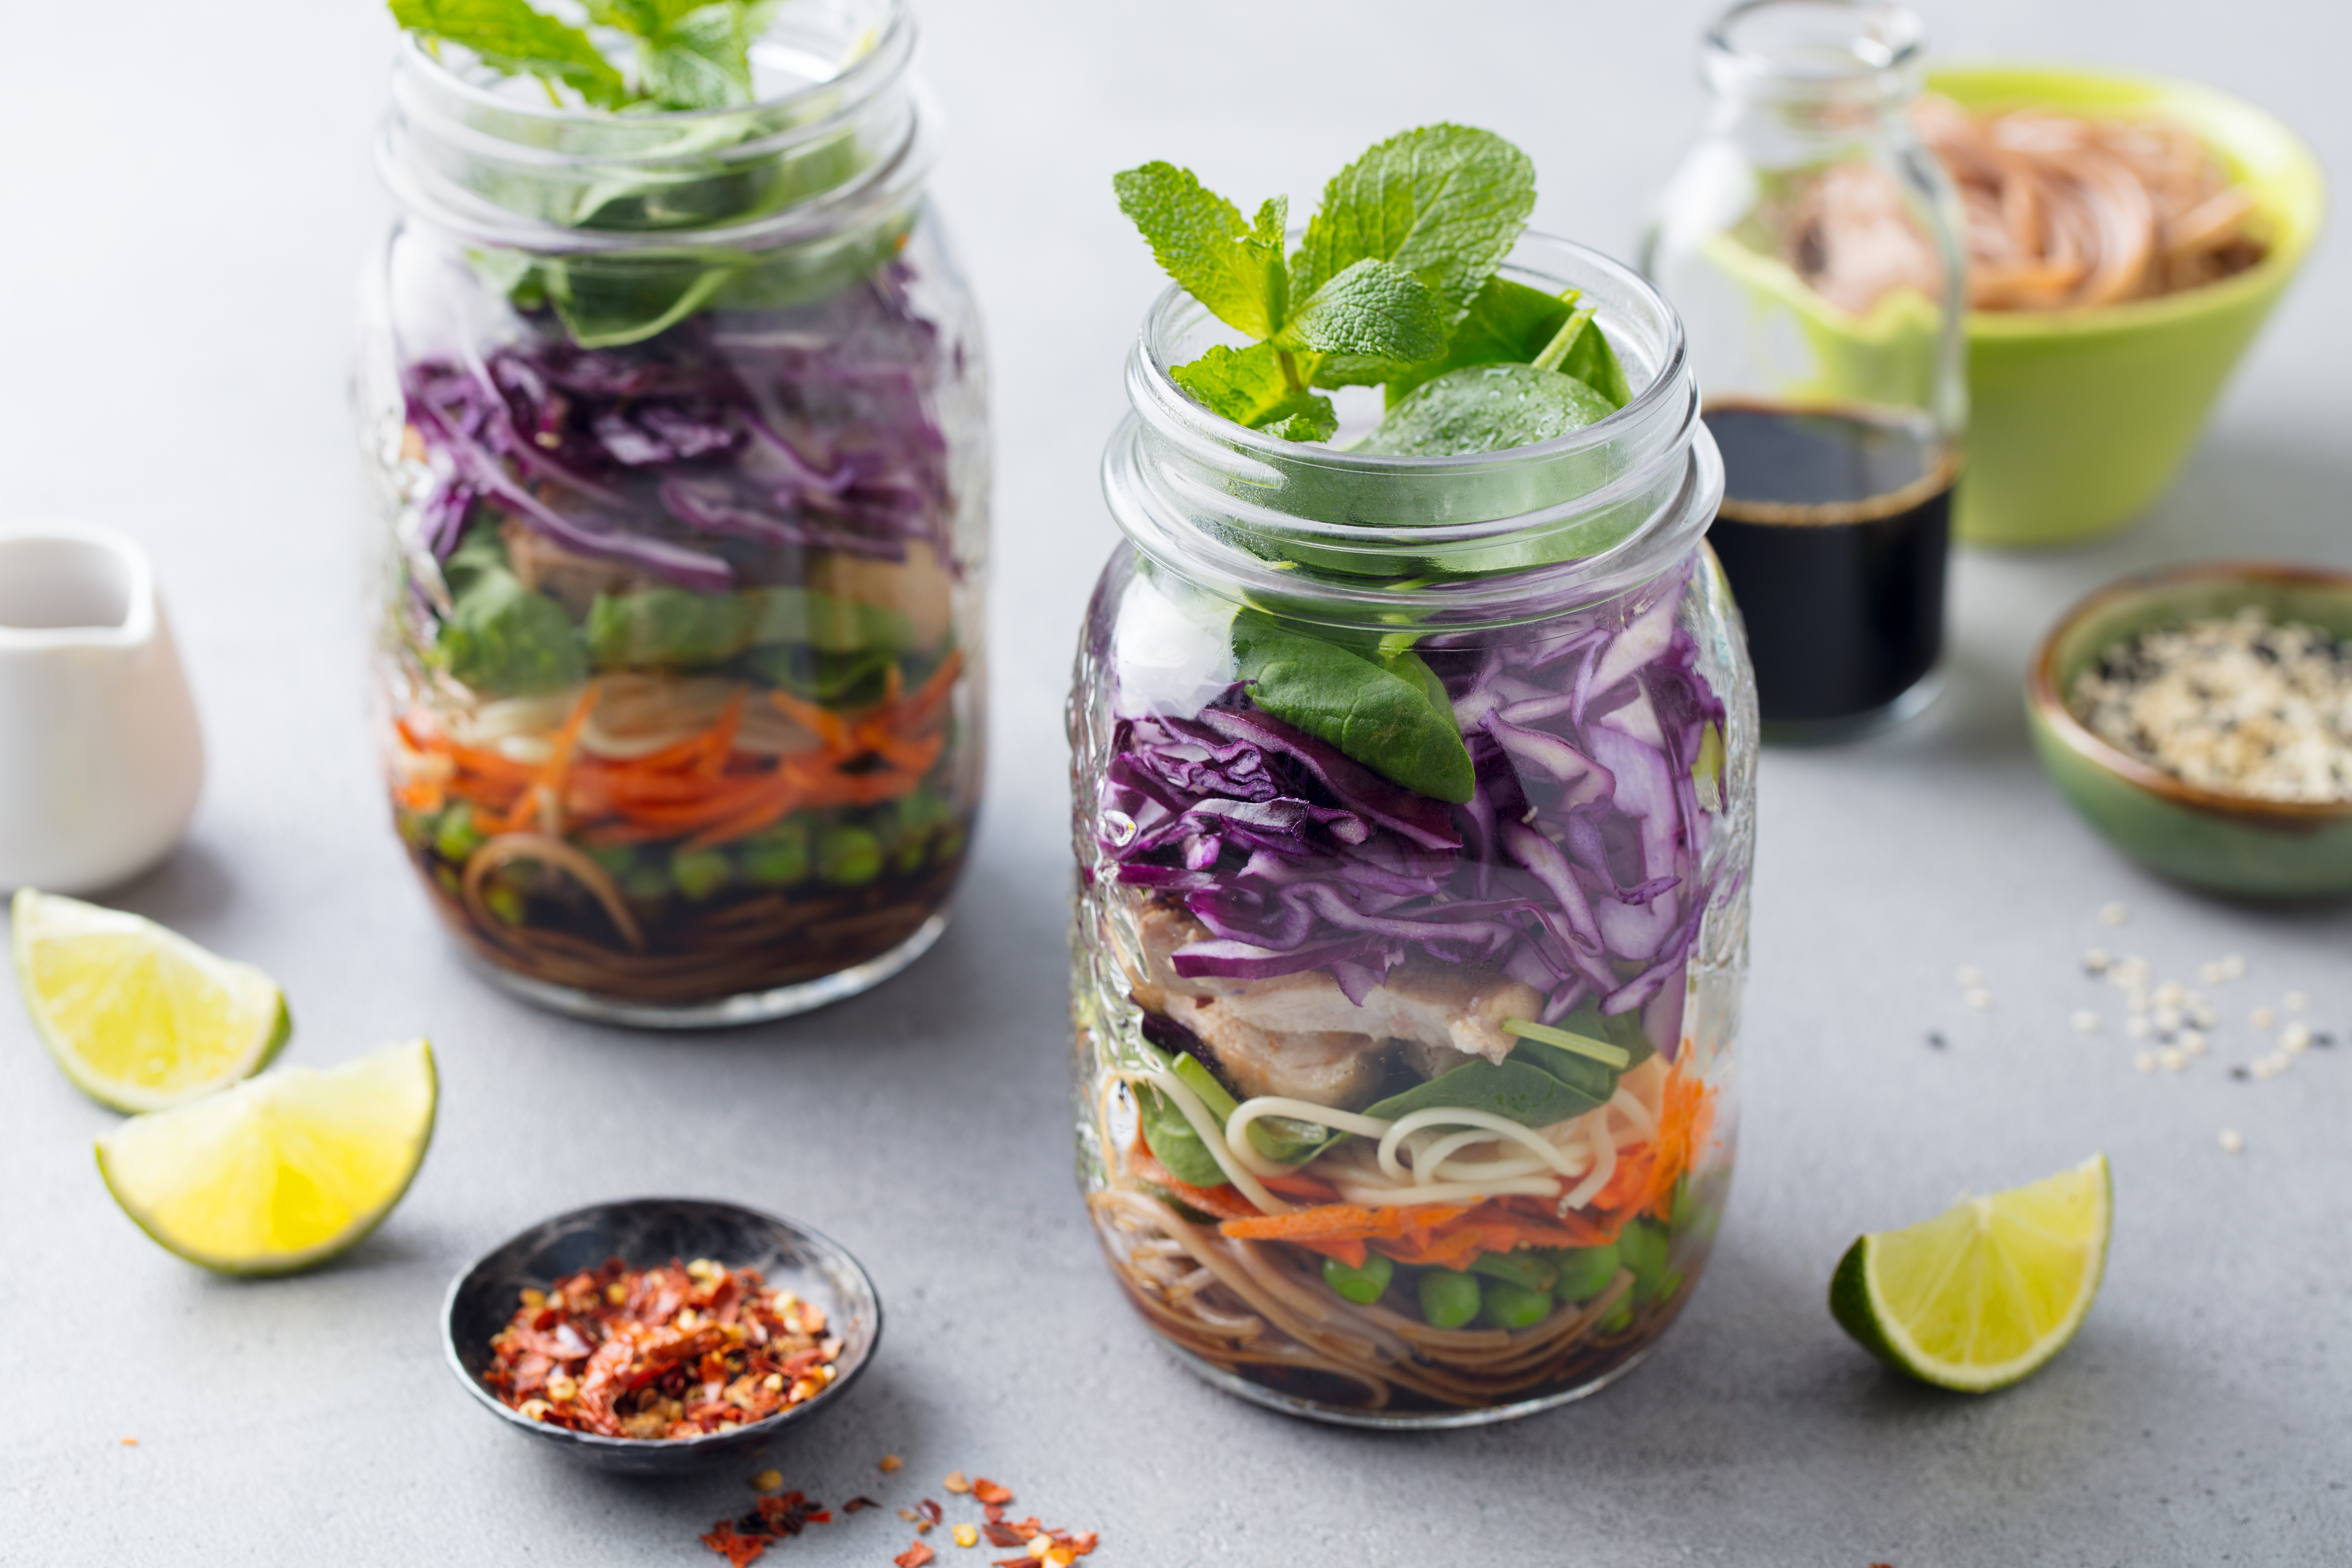 A pair of glass jars filled with noodles, vegetables, and fresh herbs.